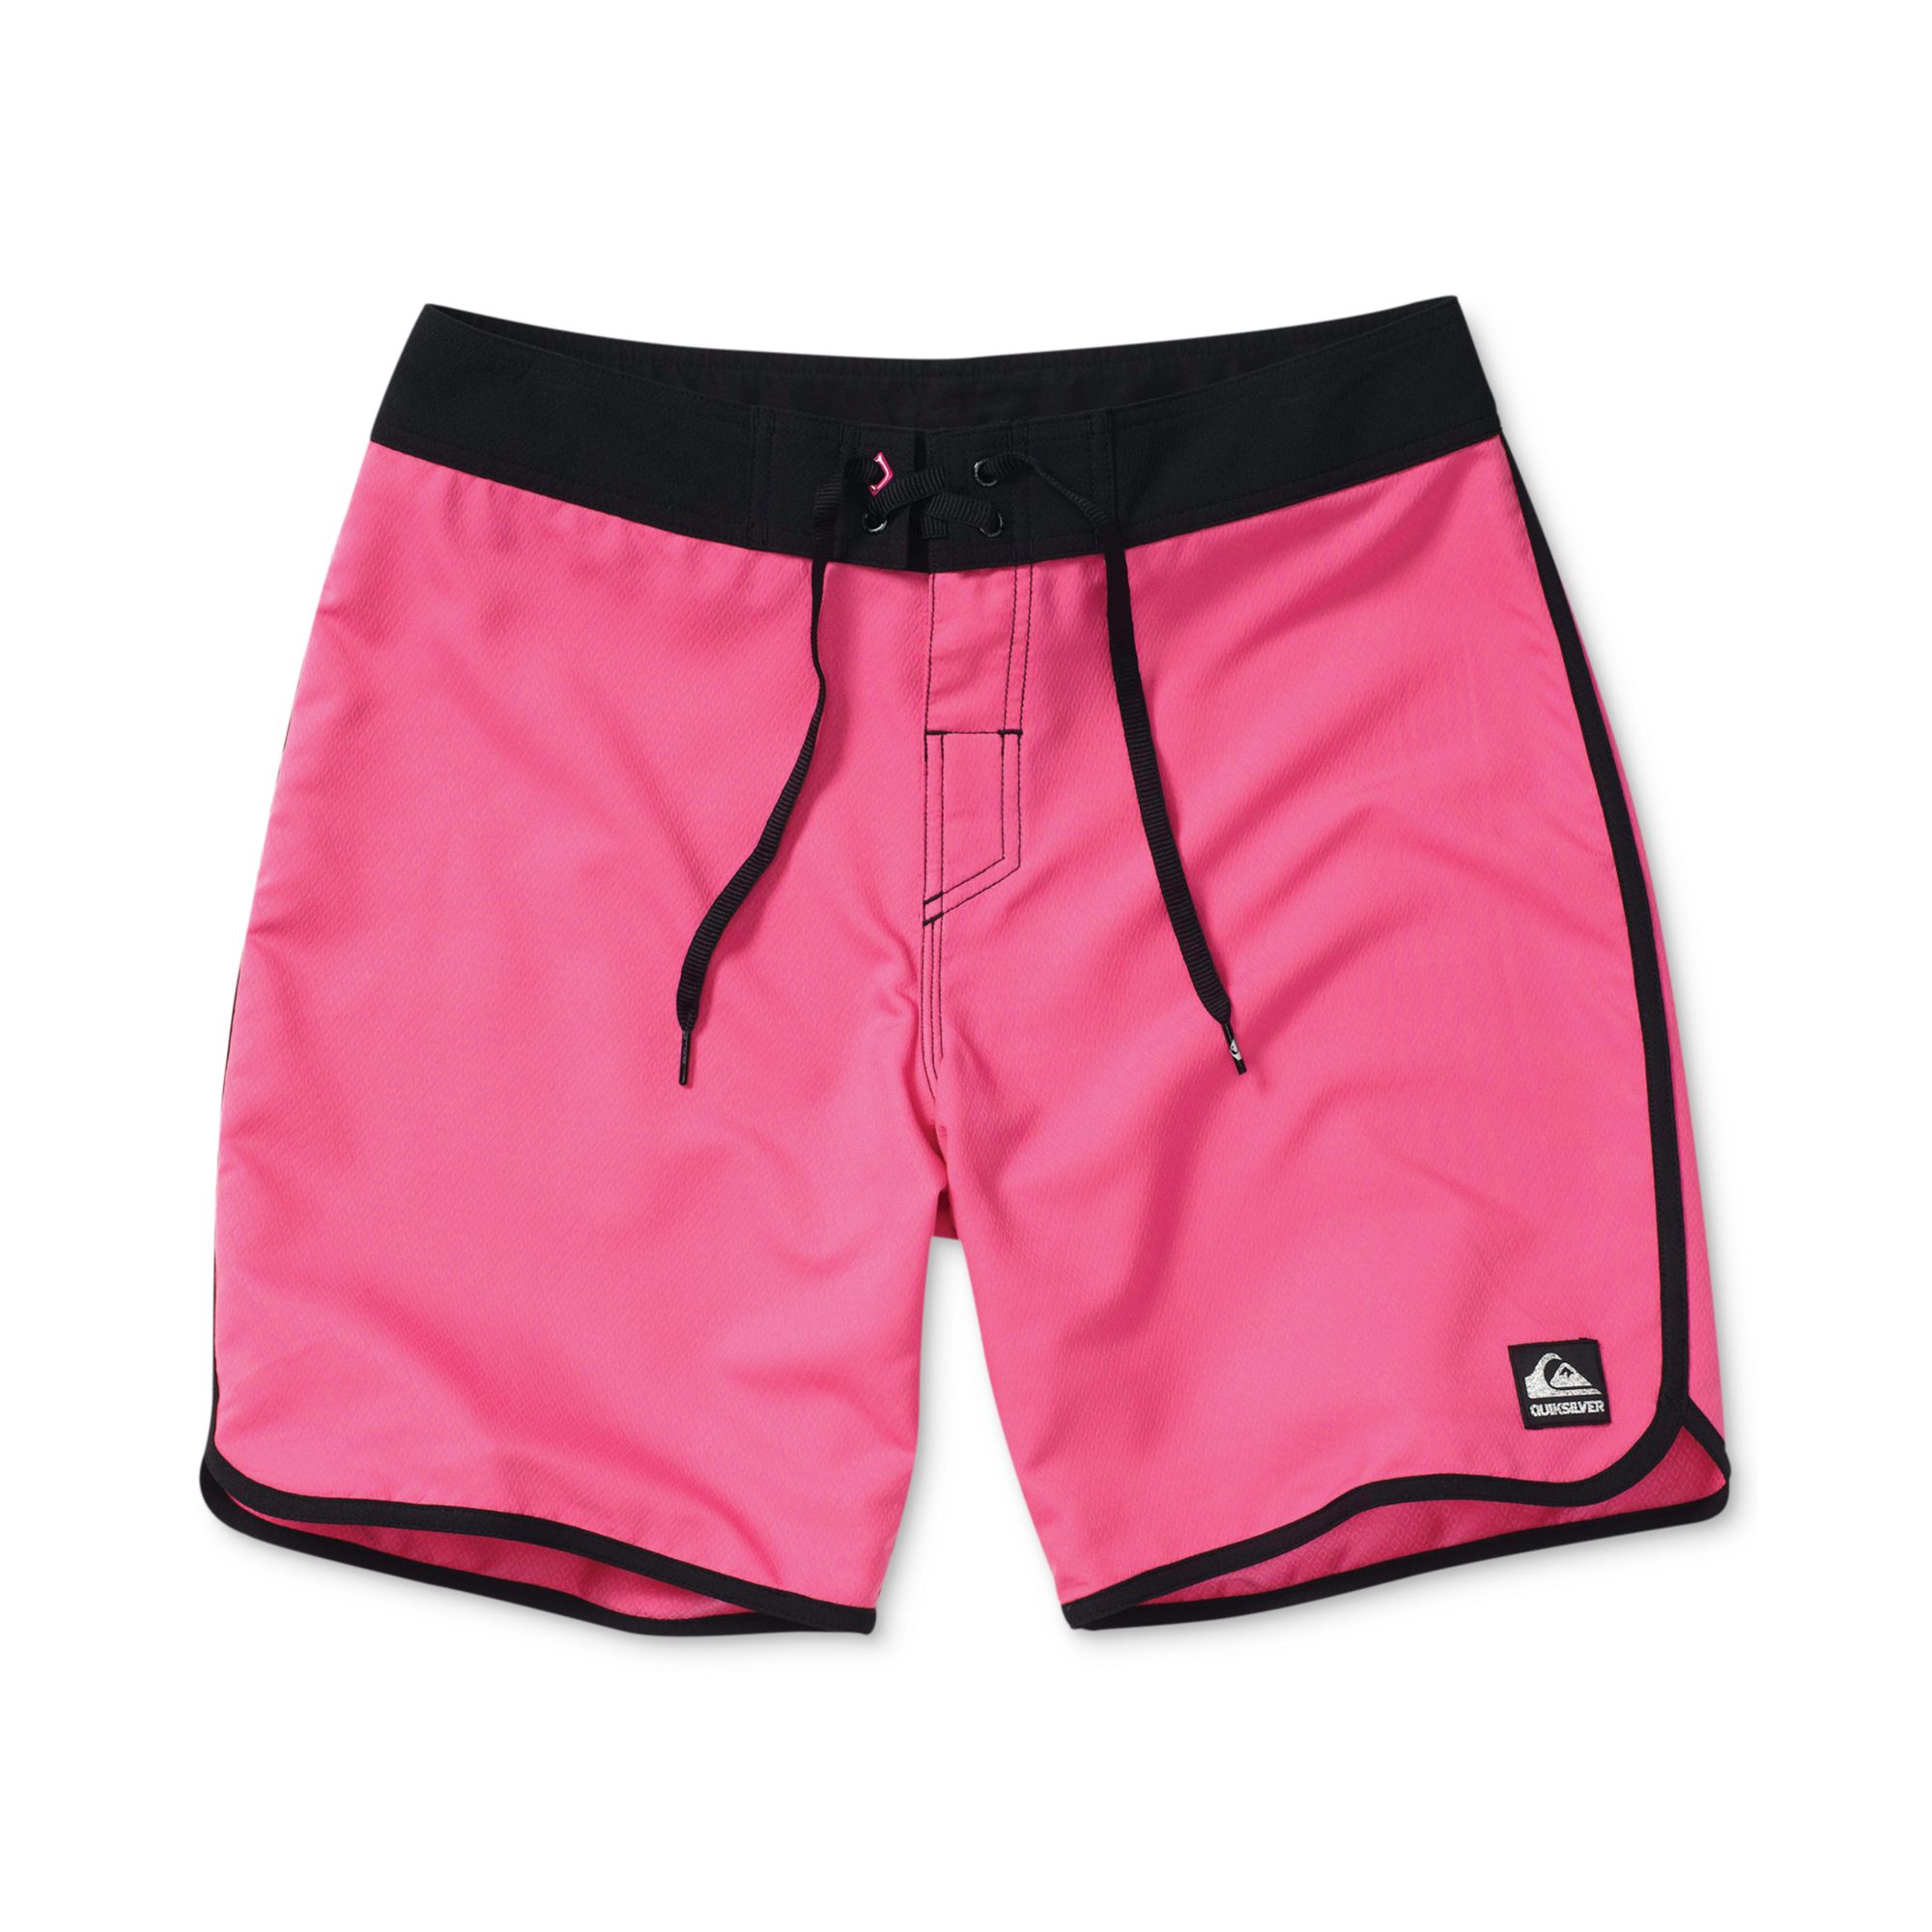 Lyst - Quiksilver Og Scallop Solid Boardshorts in Pink for Men